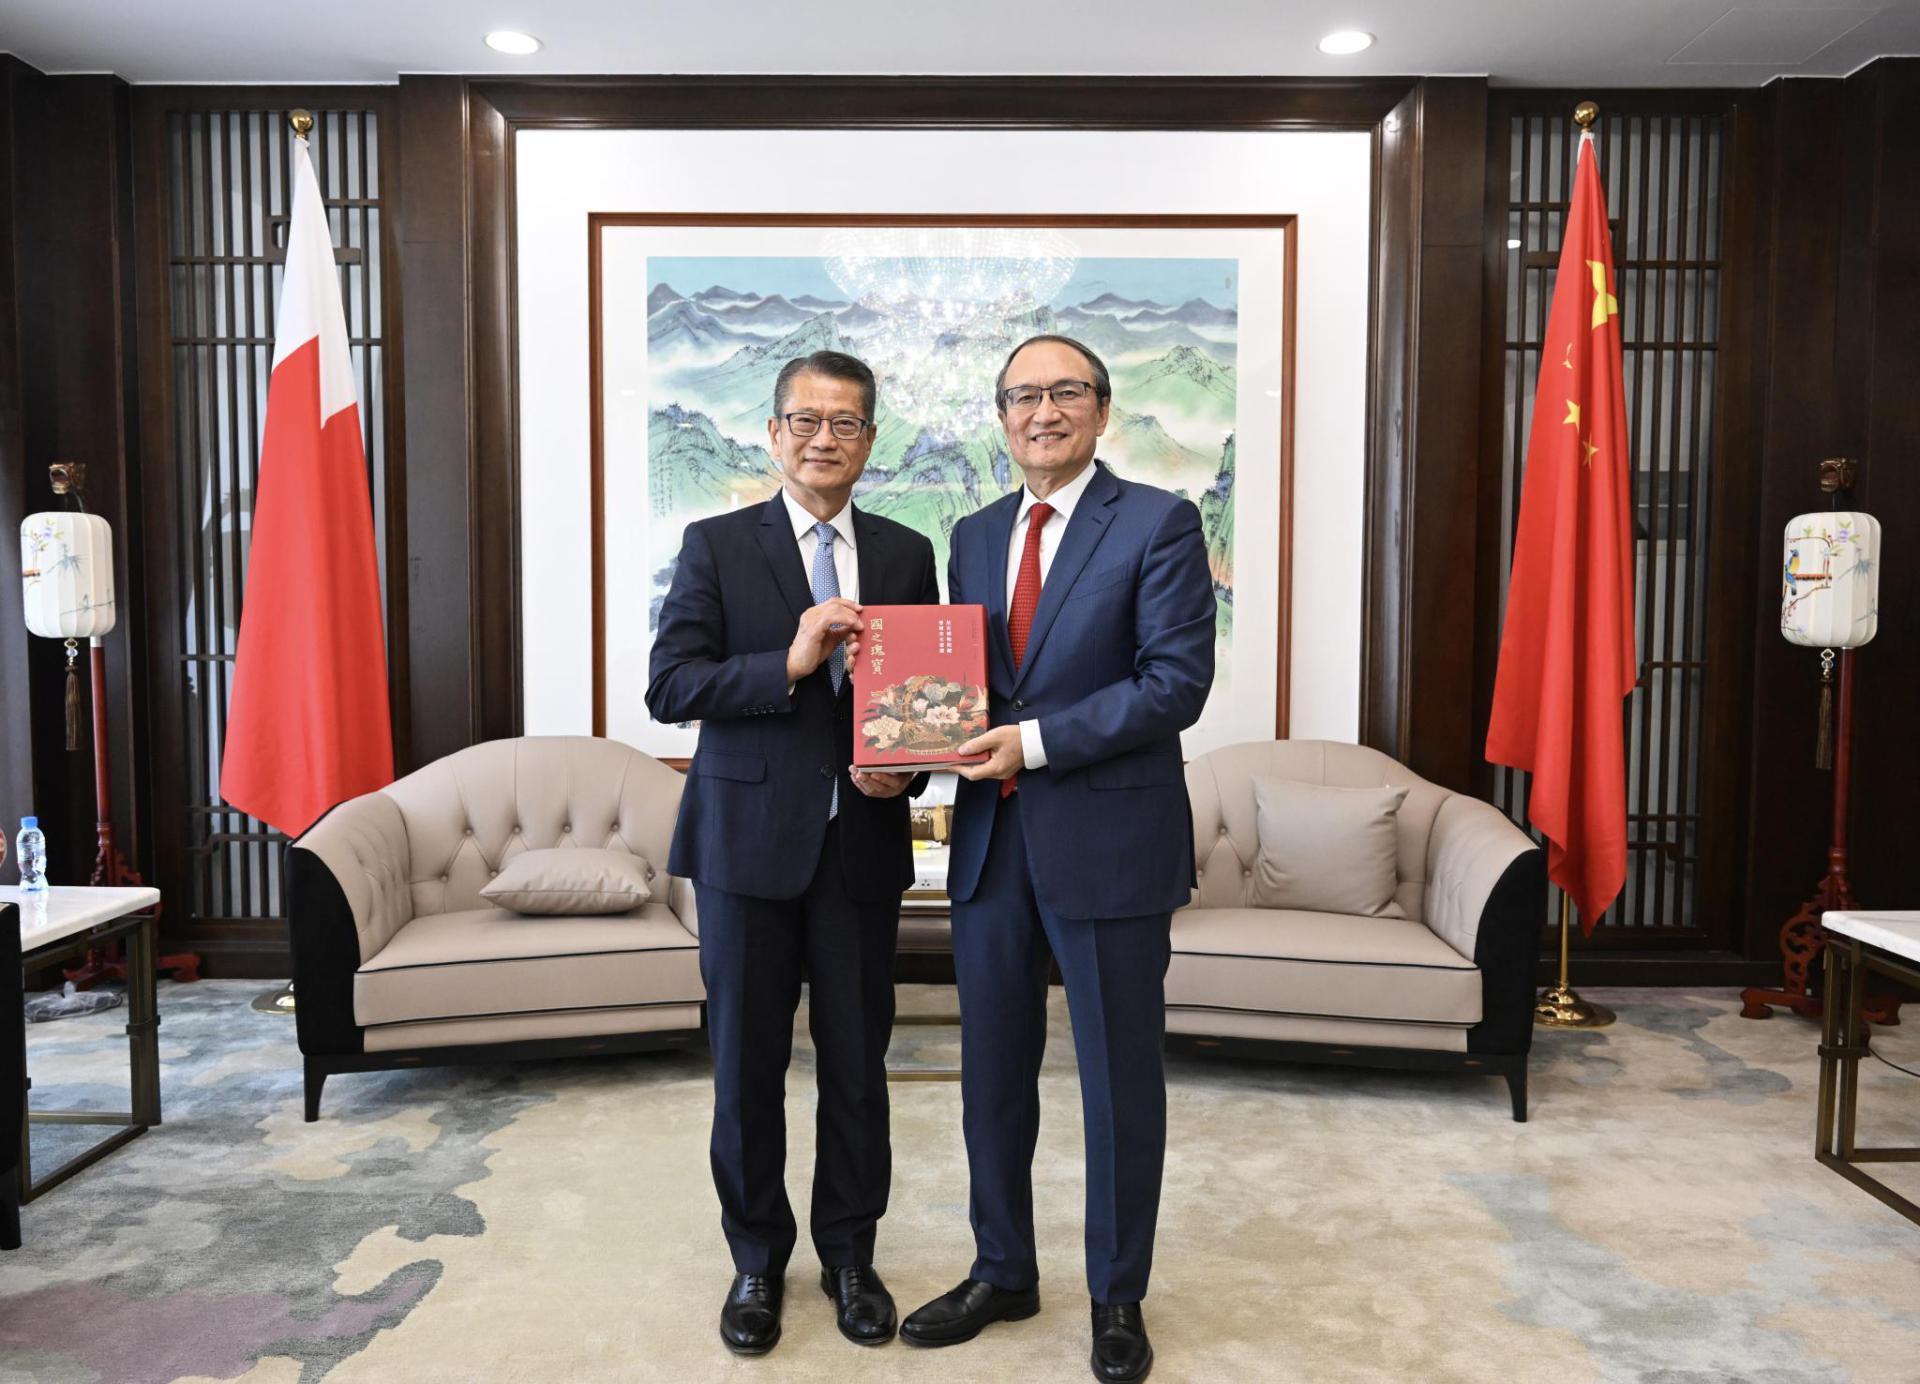 The Financial Secretary, Mr Paul Chan, continued his visit to Bahrain yesterday (October 24, Bahrain time). Photo shows Mr Chan (left) paying a courtesy call to the Ambassador Extraordinary and Plenipotentiary of the People's Republic of China to the Kingdom of Bahrain, Mr An Wa'er (right).
